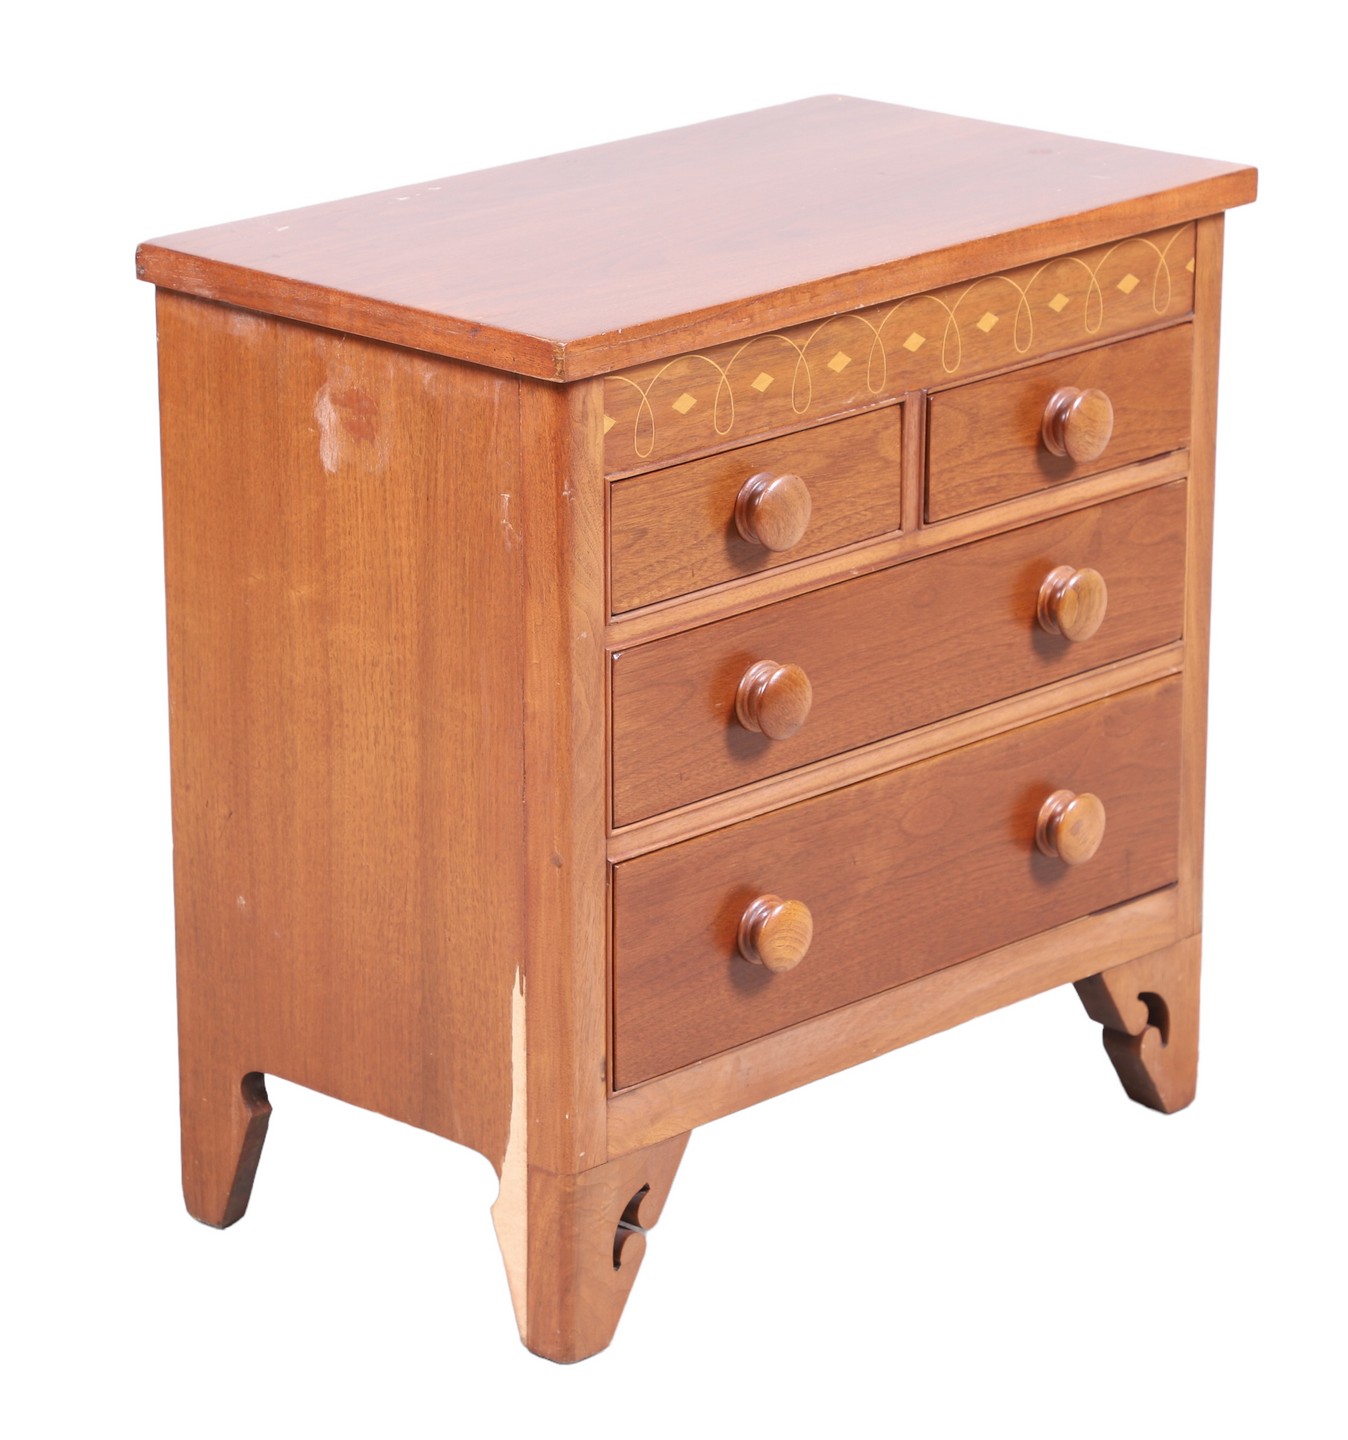 Drexel Cherry inlaid side table,